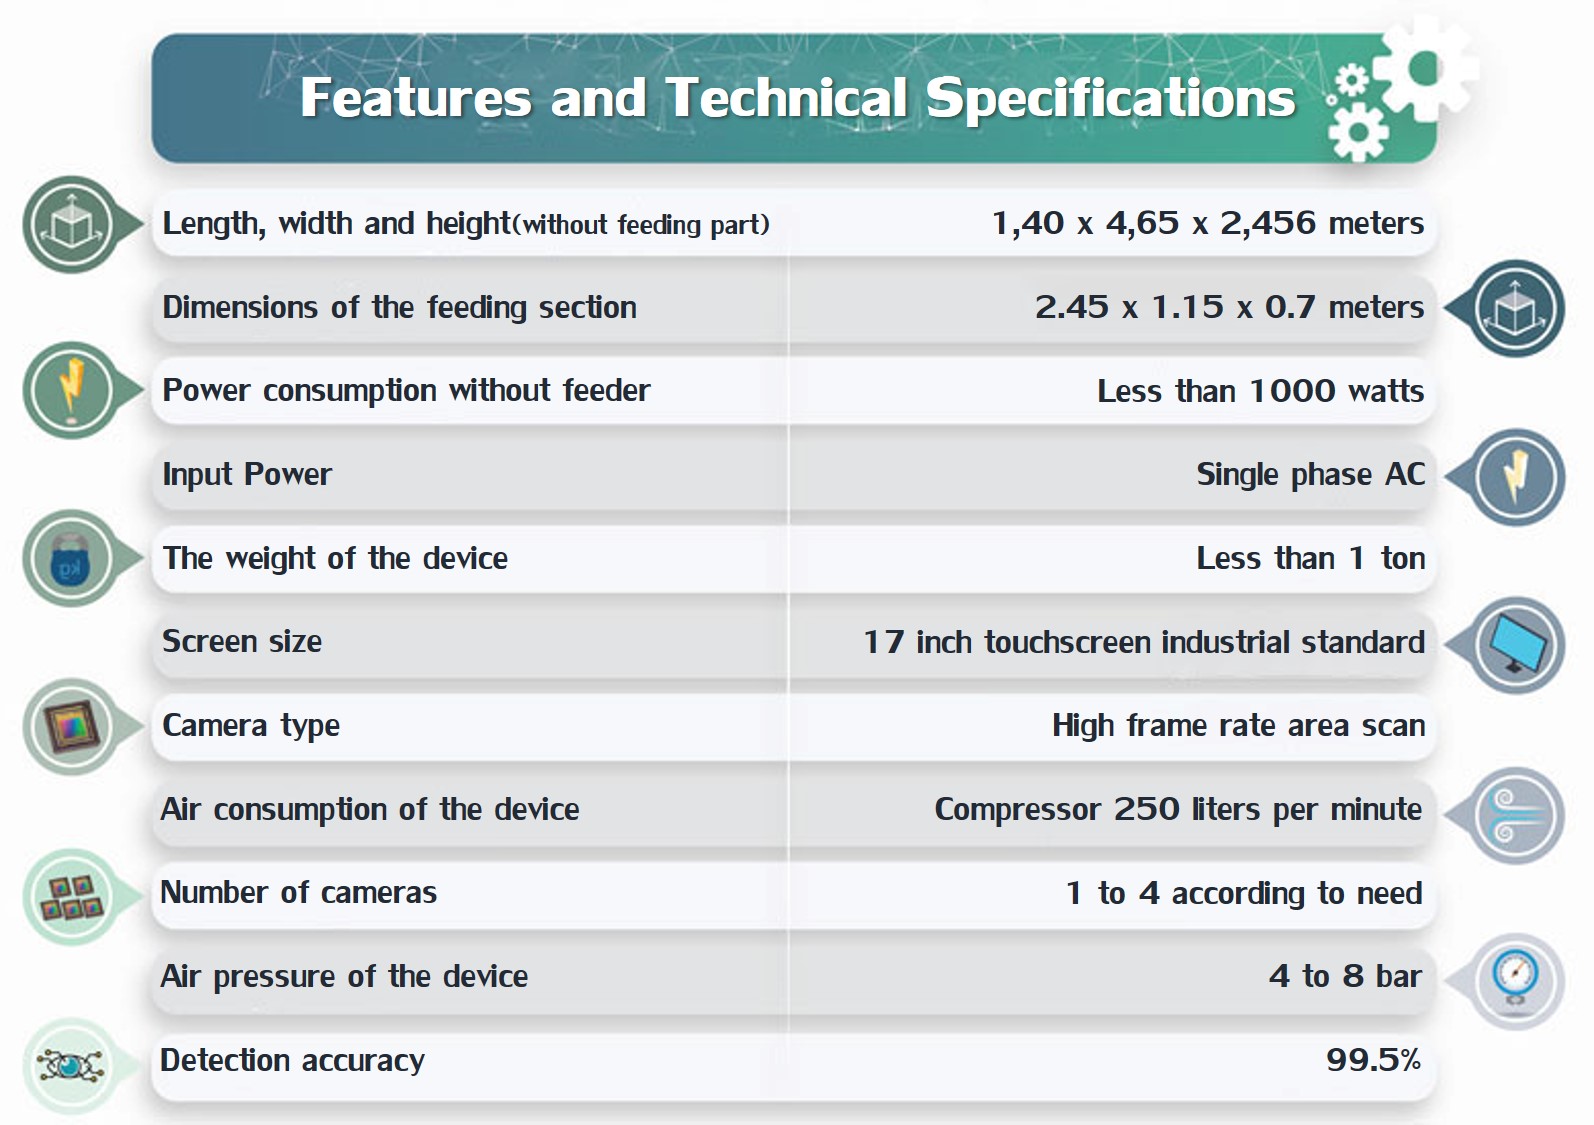 Table of technical specifications of dry fruit sorter